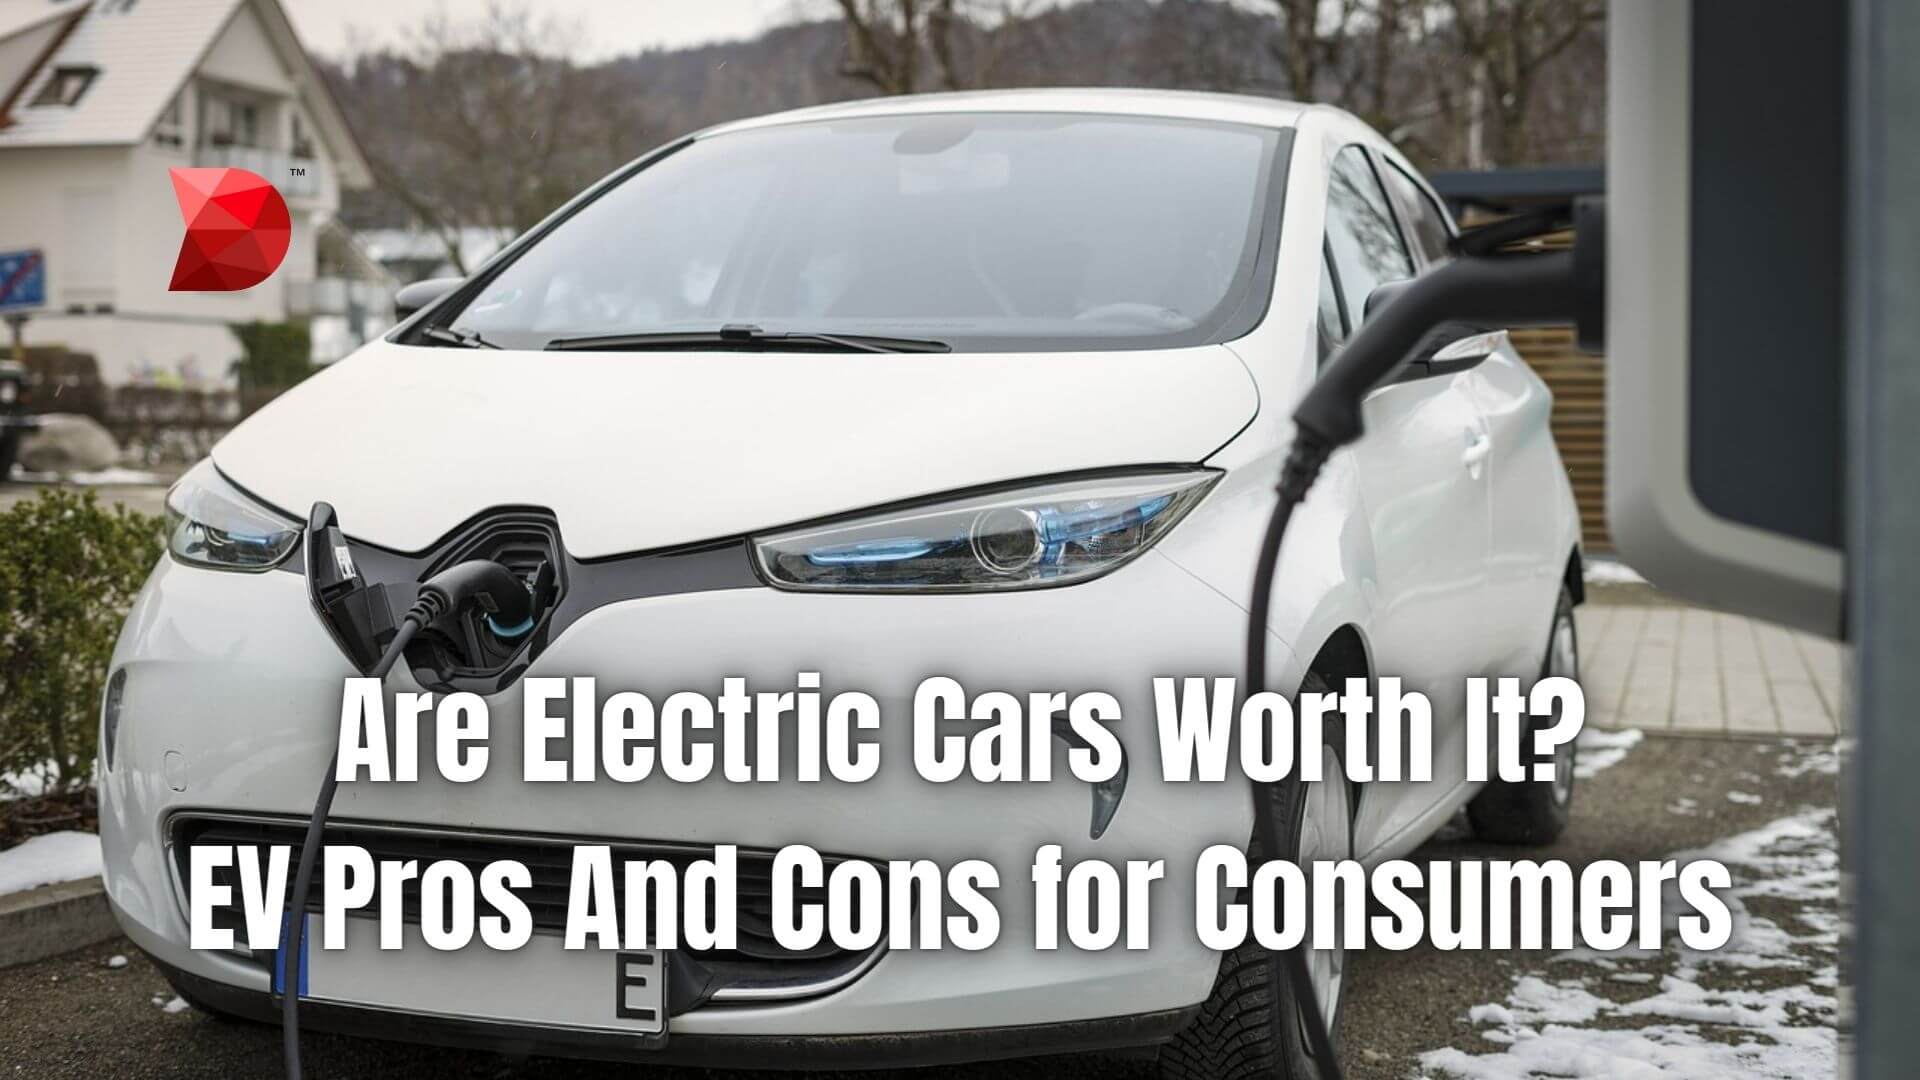 Are Electric Cars Worth It EV Pros And Cons for Consumers